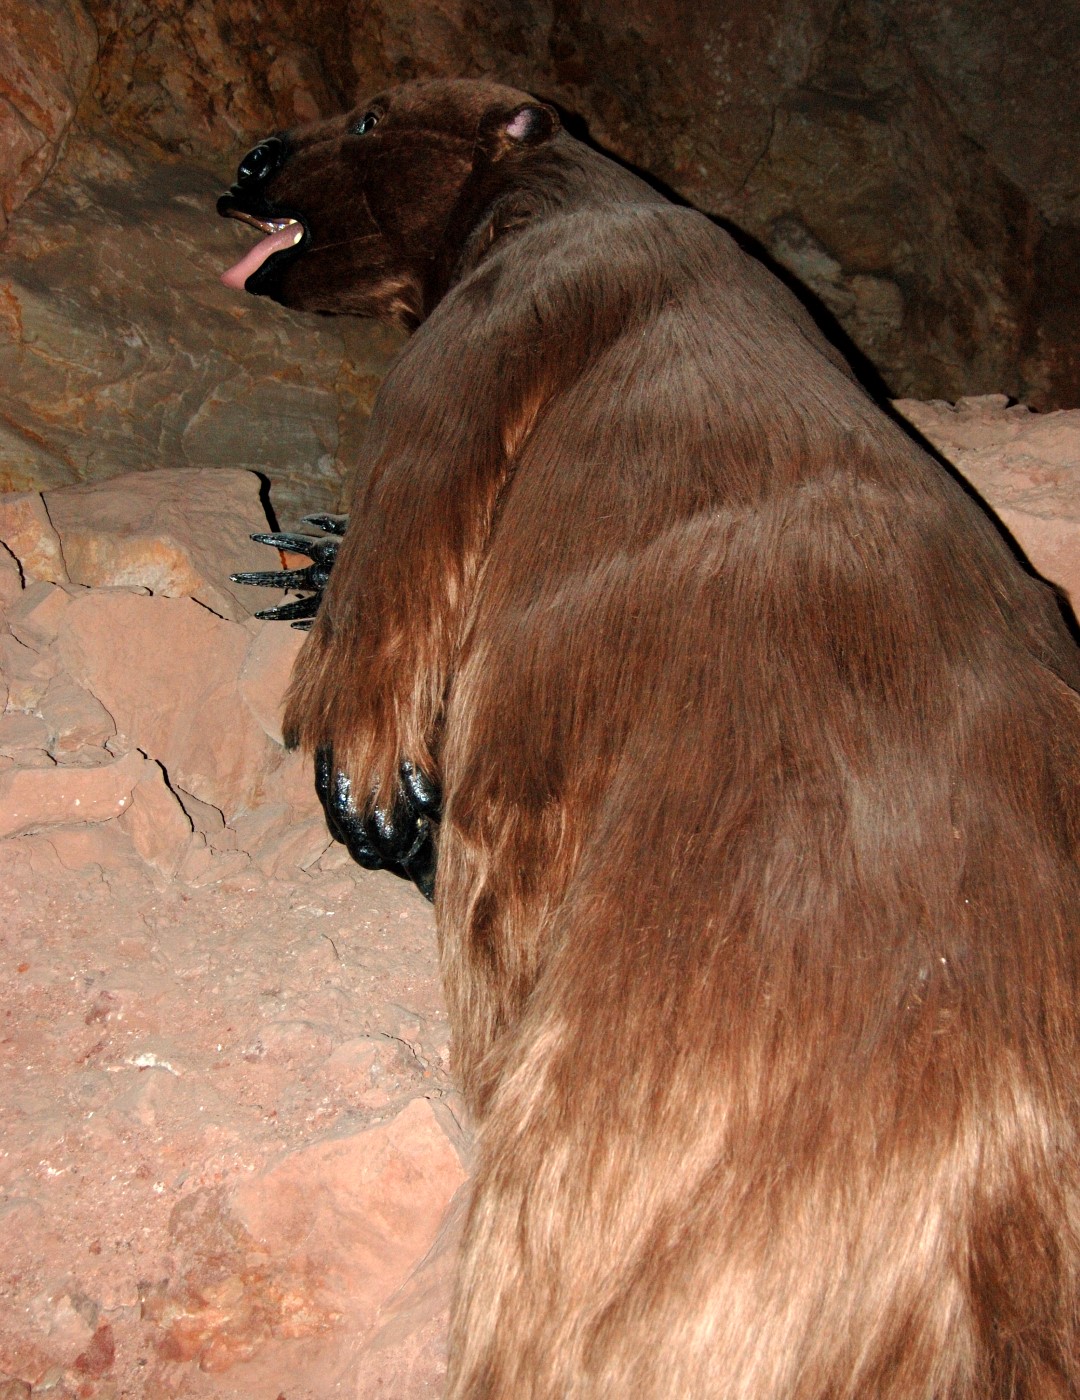 “Gertie,” a replica of the real giant ground sloth that became trapped inside the cavern 11,000 years ago. Her scratch marks are etched into the cave wall above. Photo by Crista Worthy.